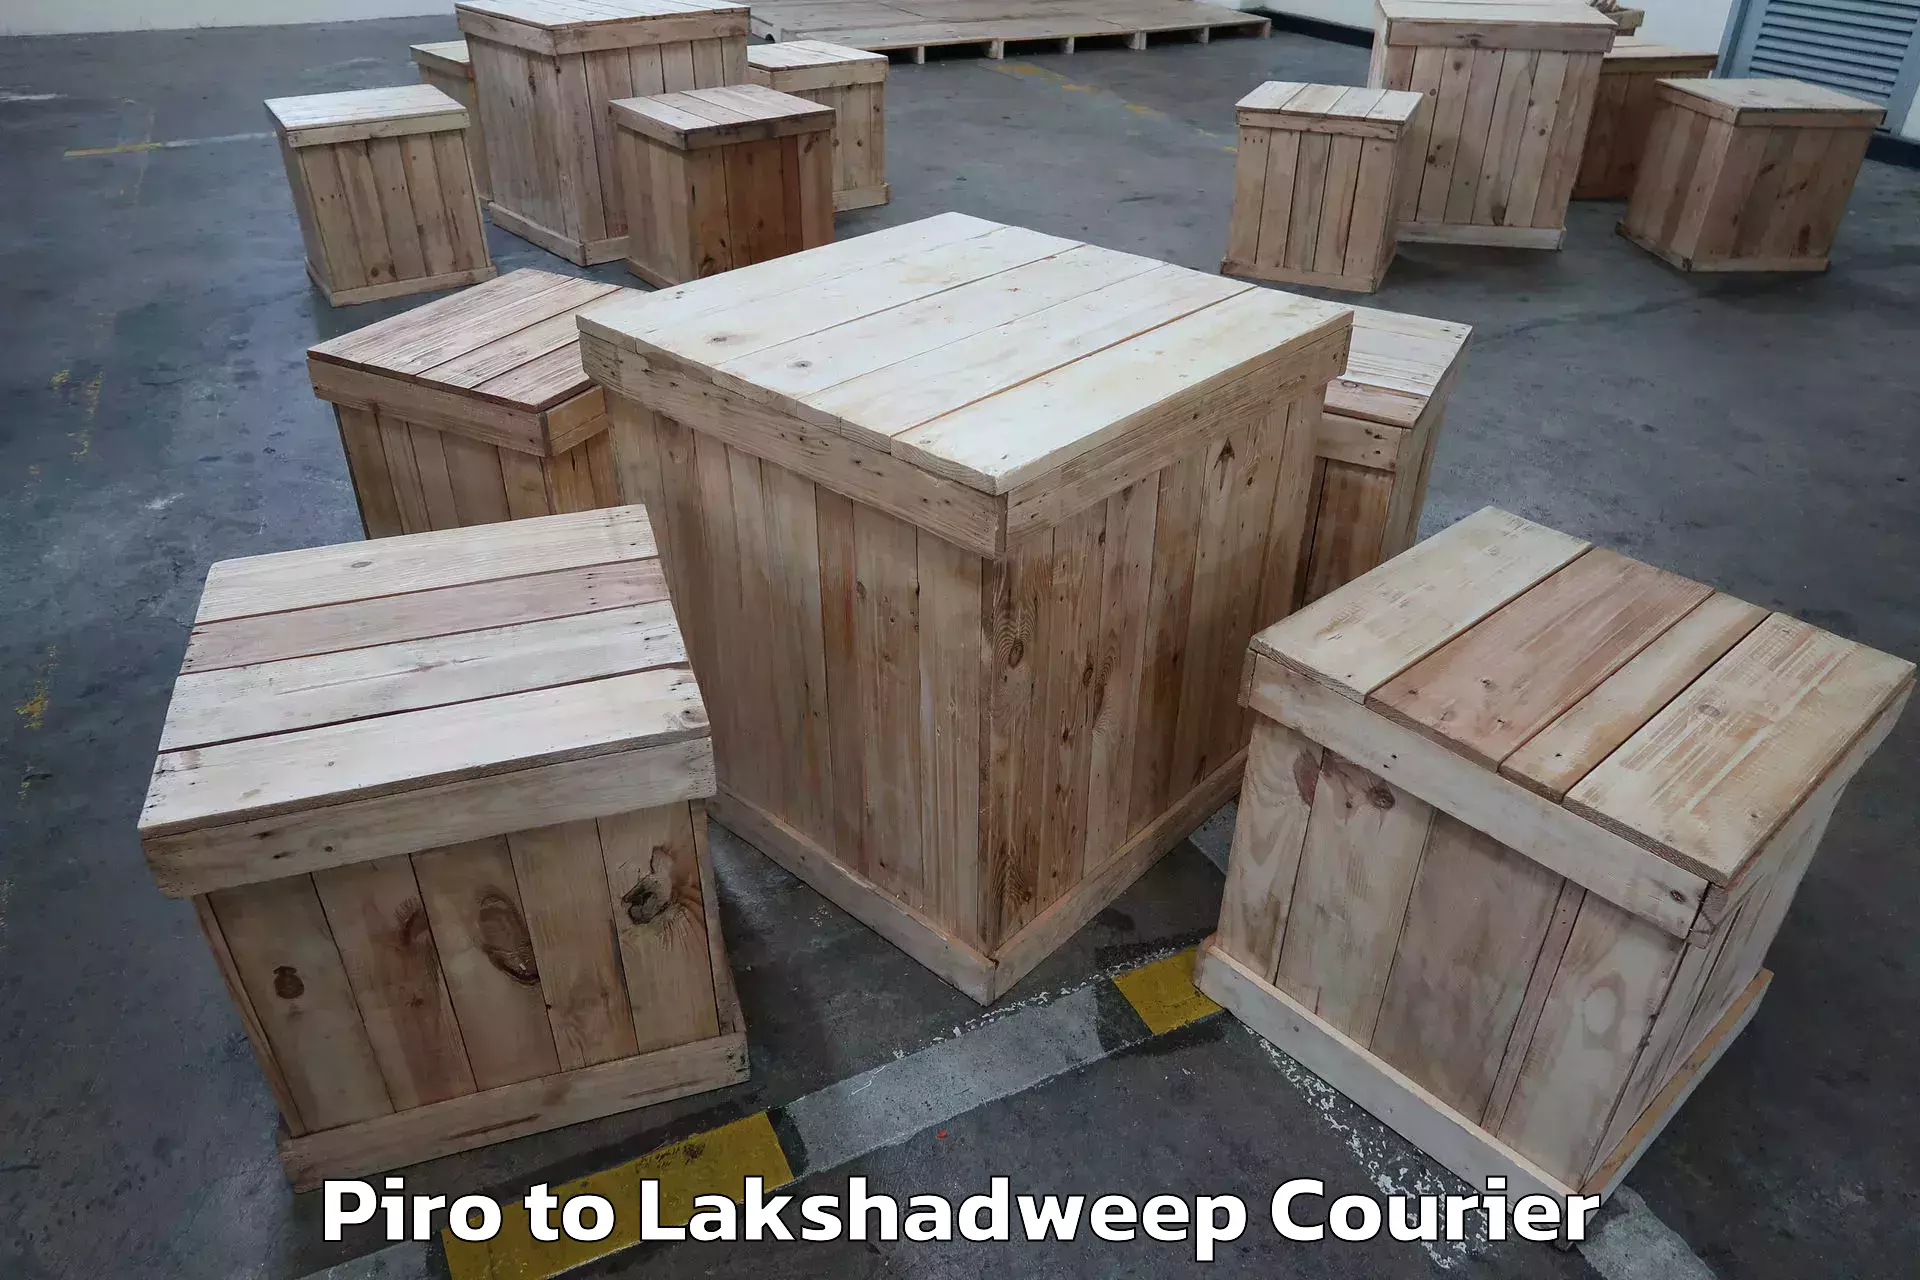 Quality moving and storage Piro to Lakshadweep